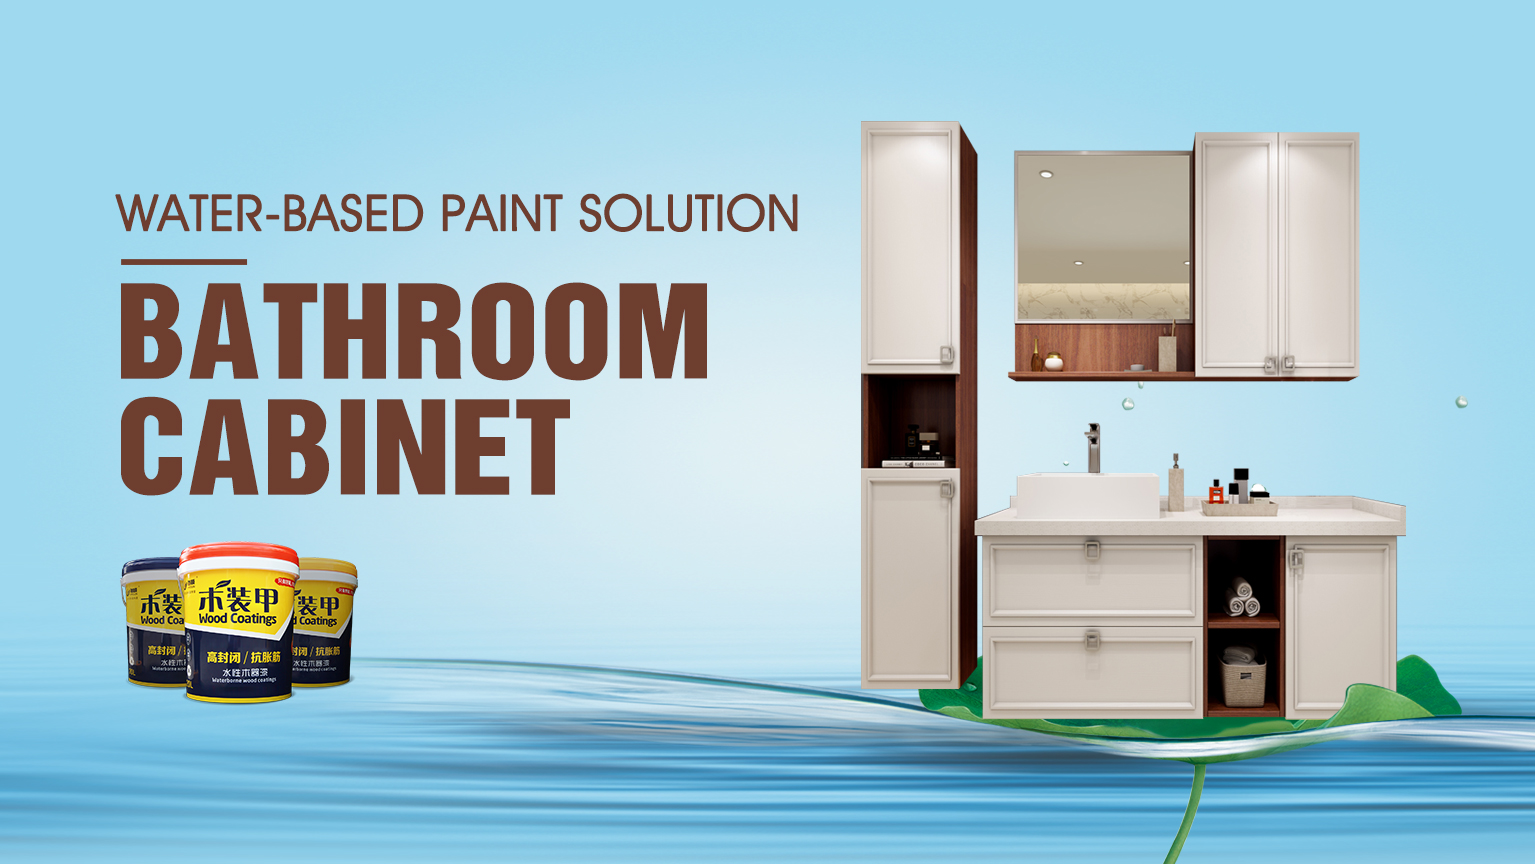 Bathroom cabinet water-based paint solution